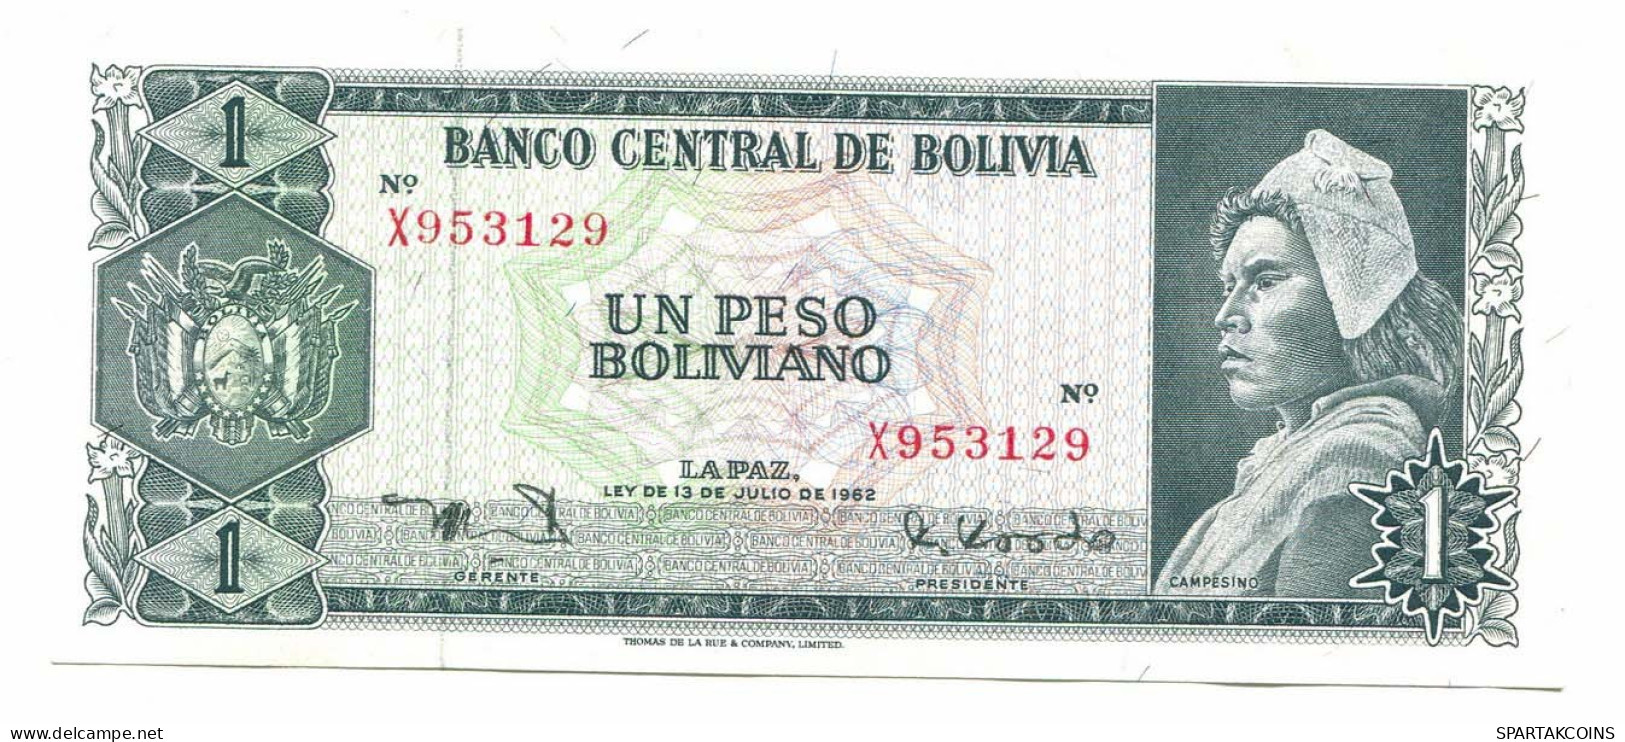 BOLIVIA 1 PESO 1962 AUNC Paper Money Banknote #P10786.4 - [11] Local Banknote Issues